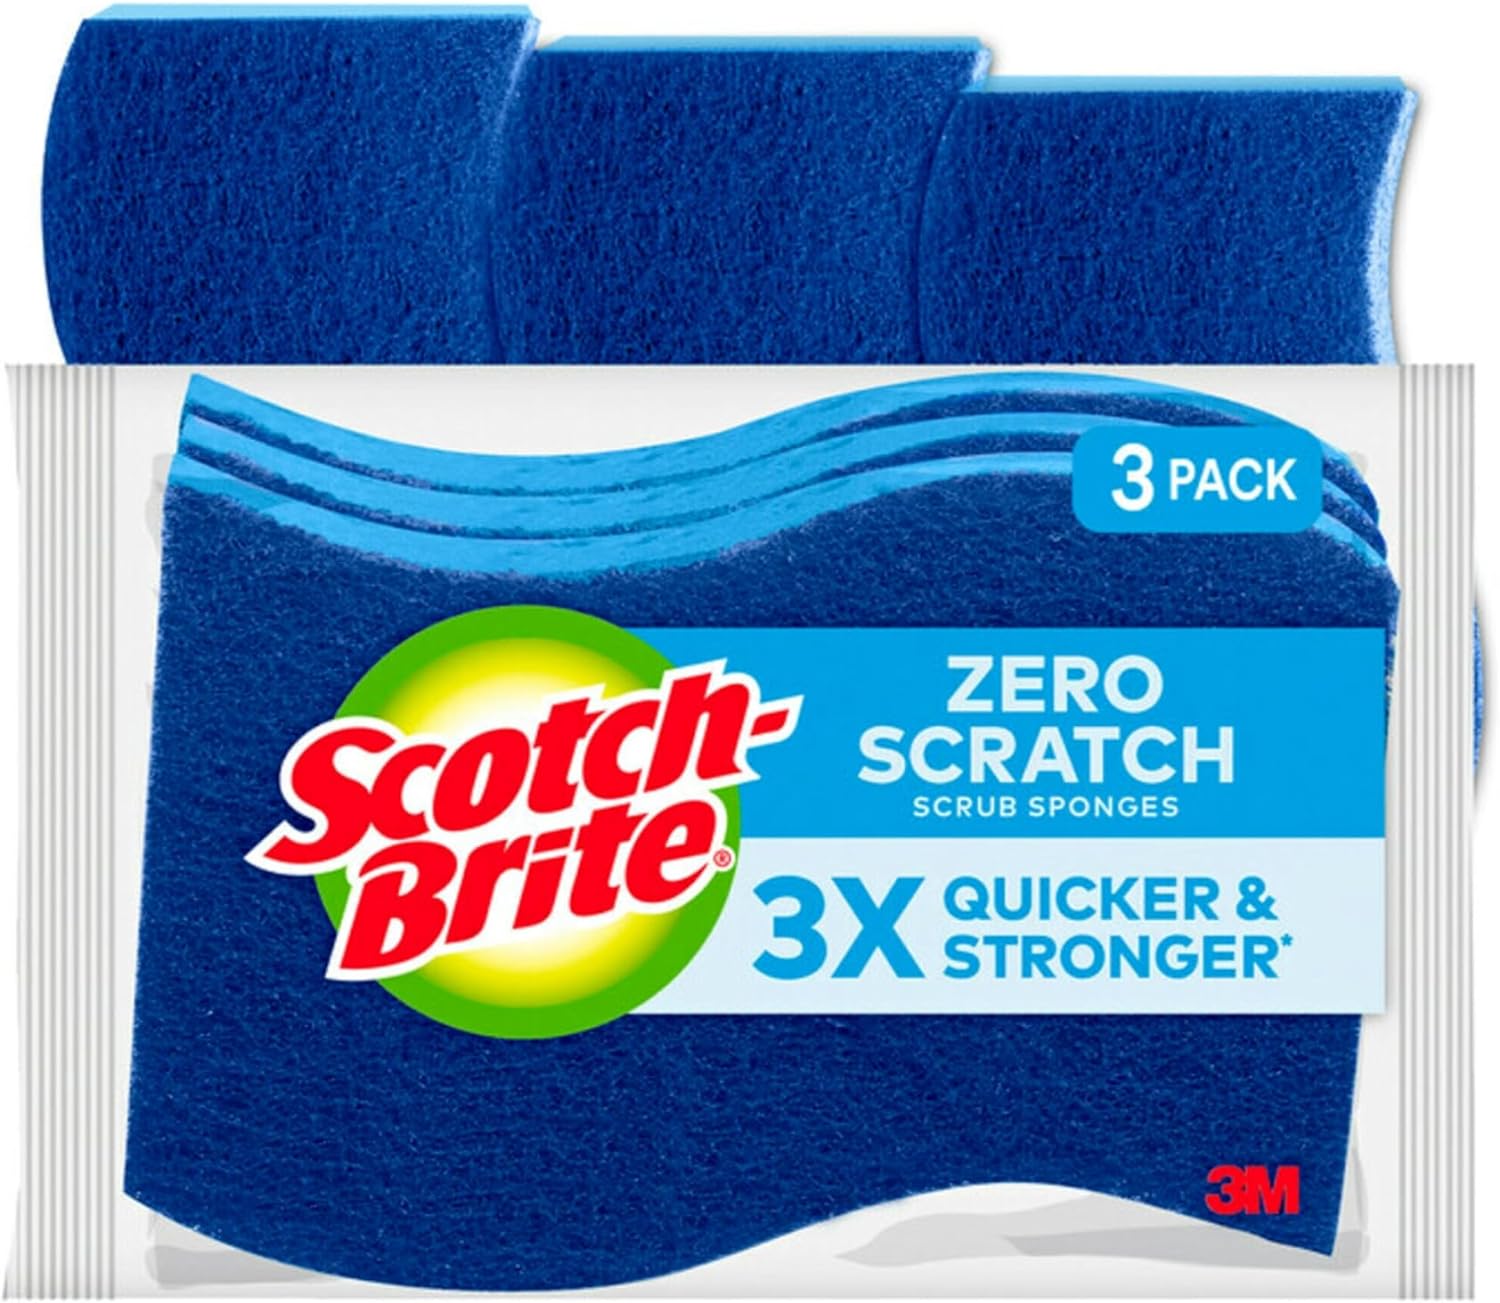 These sponges will always be my default method for cleaning dishes. They dont scratch surfaces but cleans well. Theyre also very affordable! Even with inflation, they havent skyrocketed in price. Great product for every-day use.